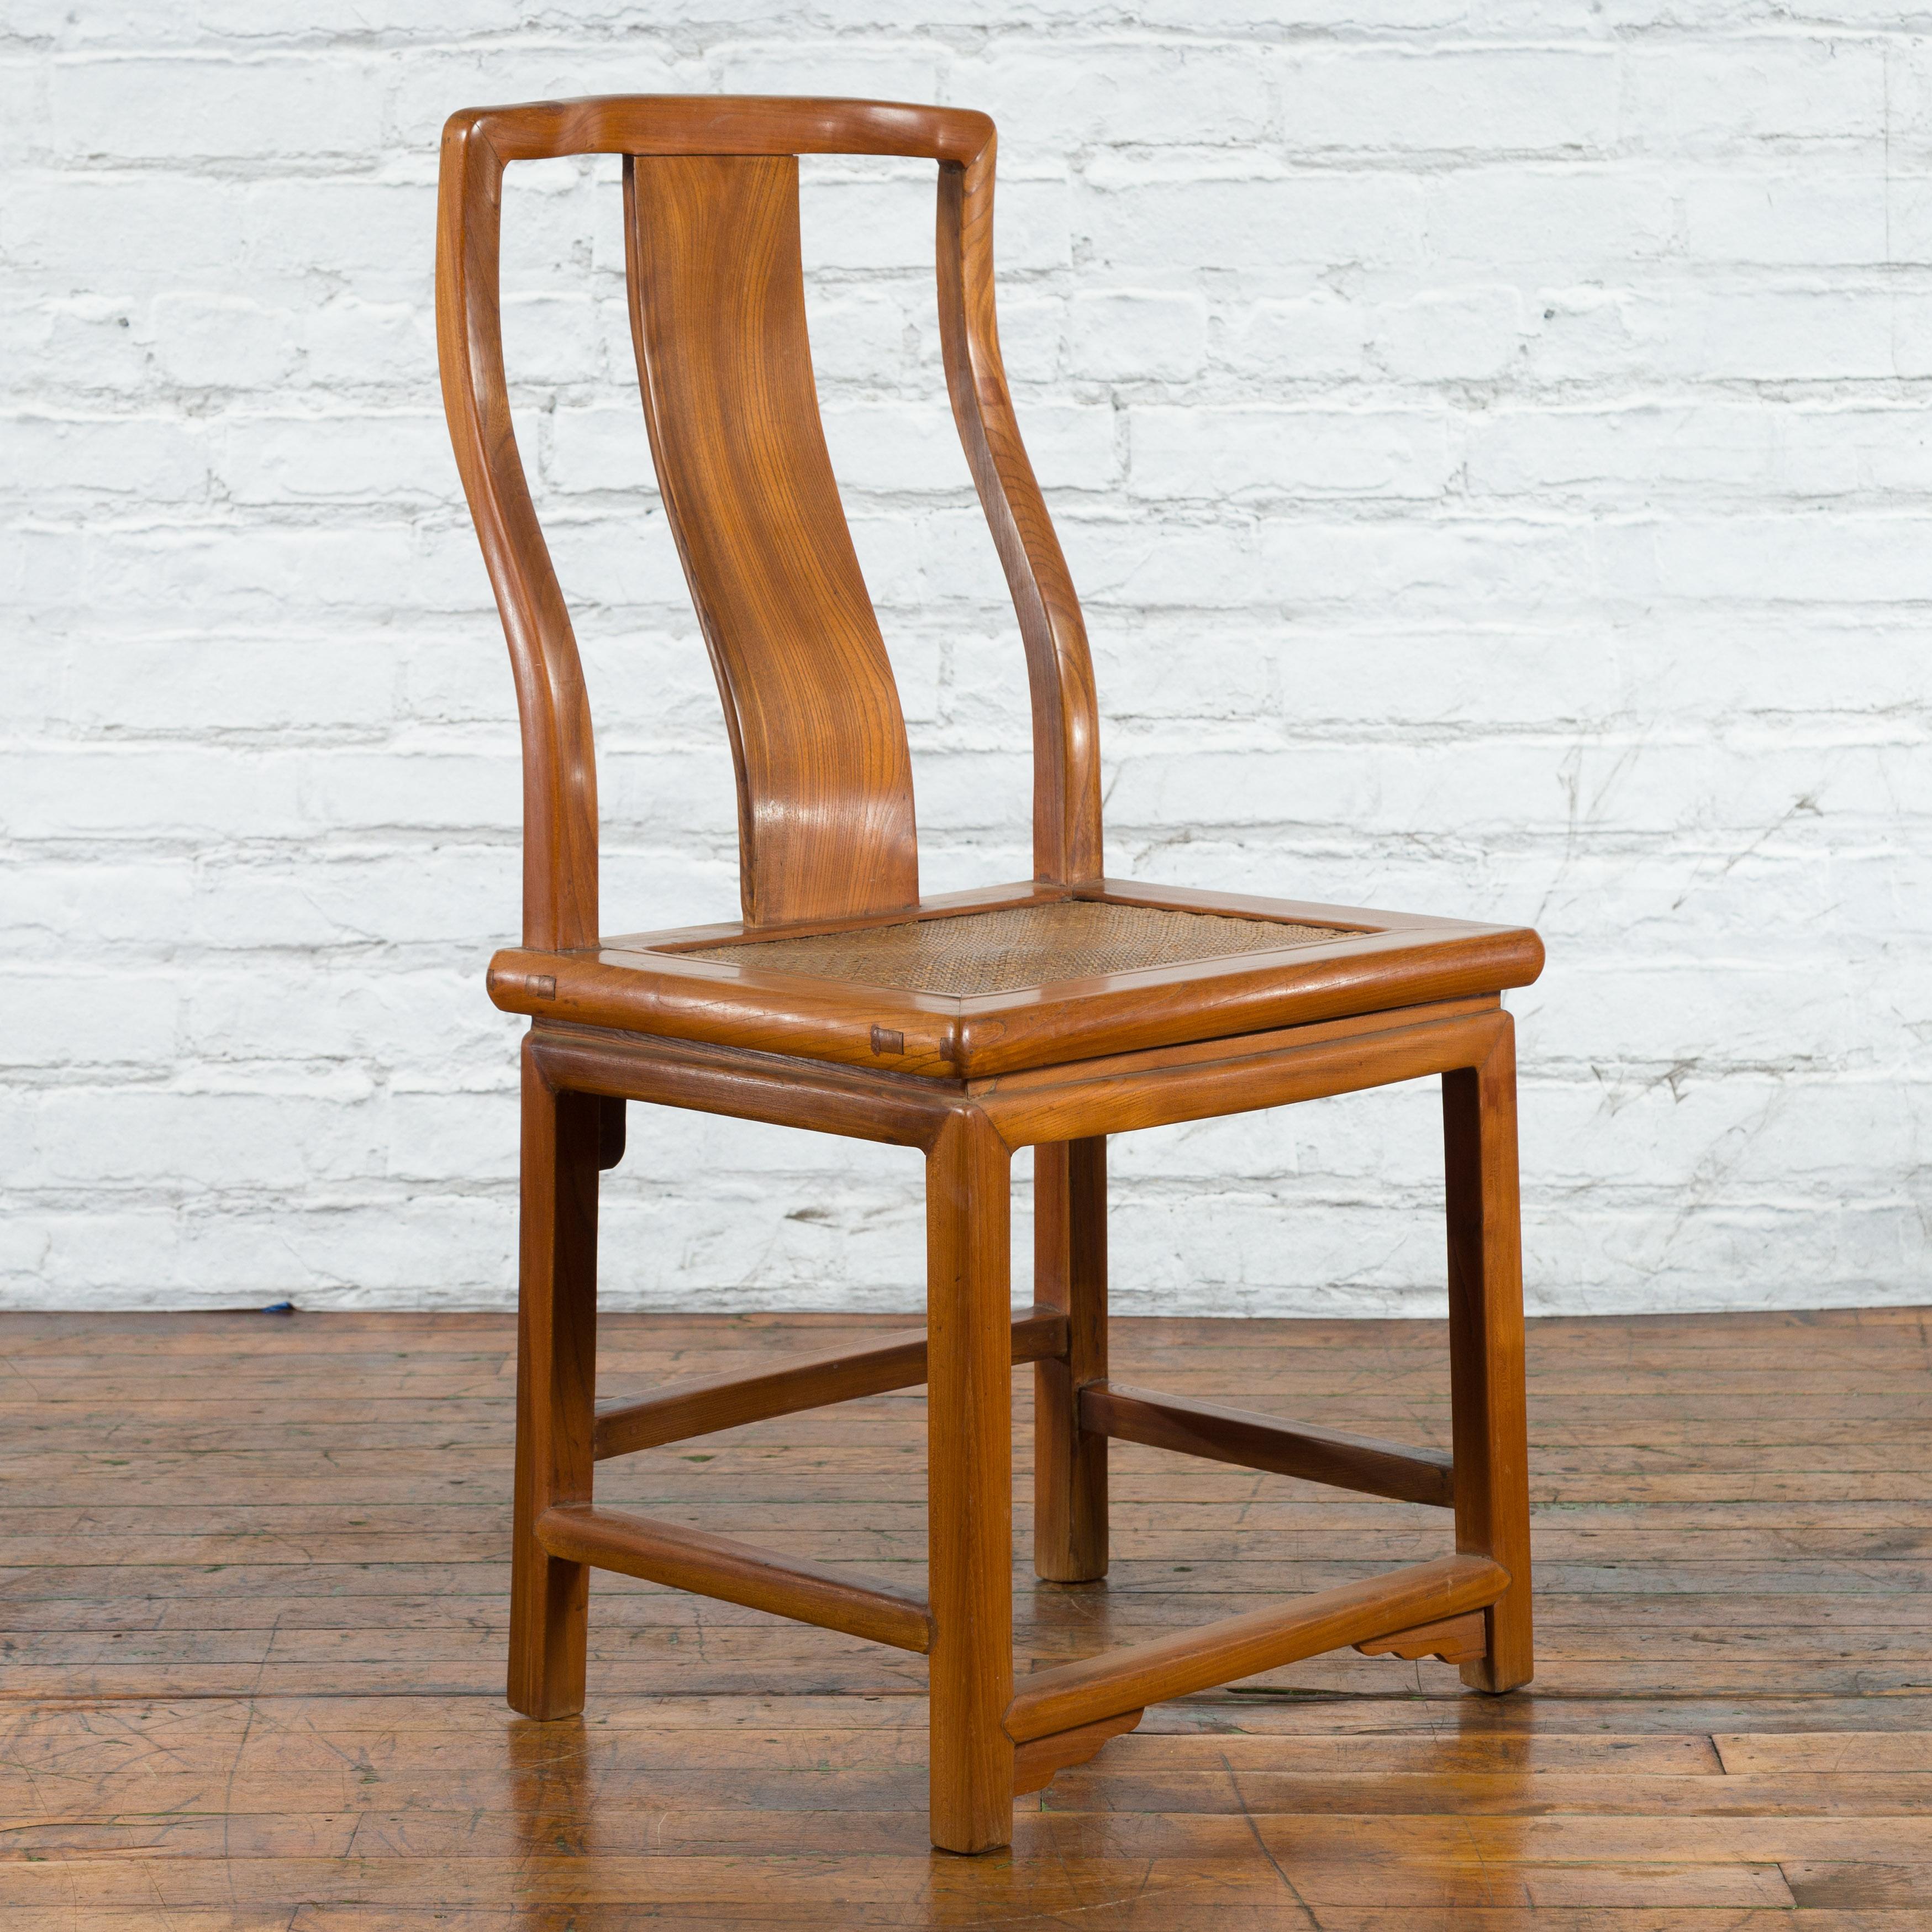 A Chinese carved elmwood side chair from the early 20th century, with woven rattan seat. Created in China during the early years of the 20th century, this elm chair features a curving back with central splat resting on a rectangular seat with rattan